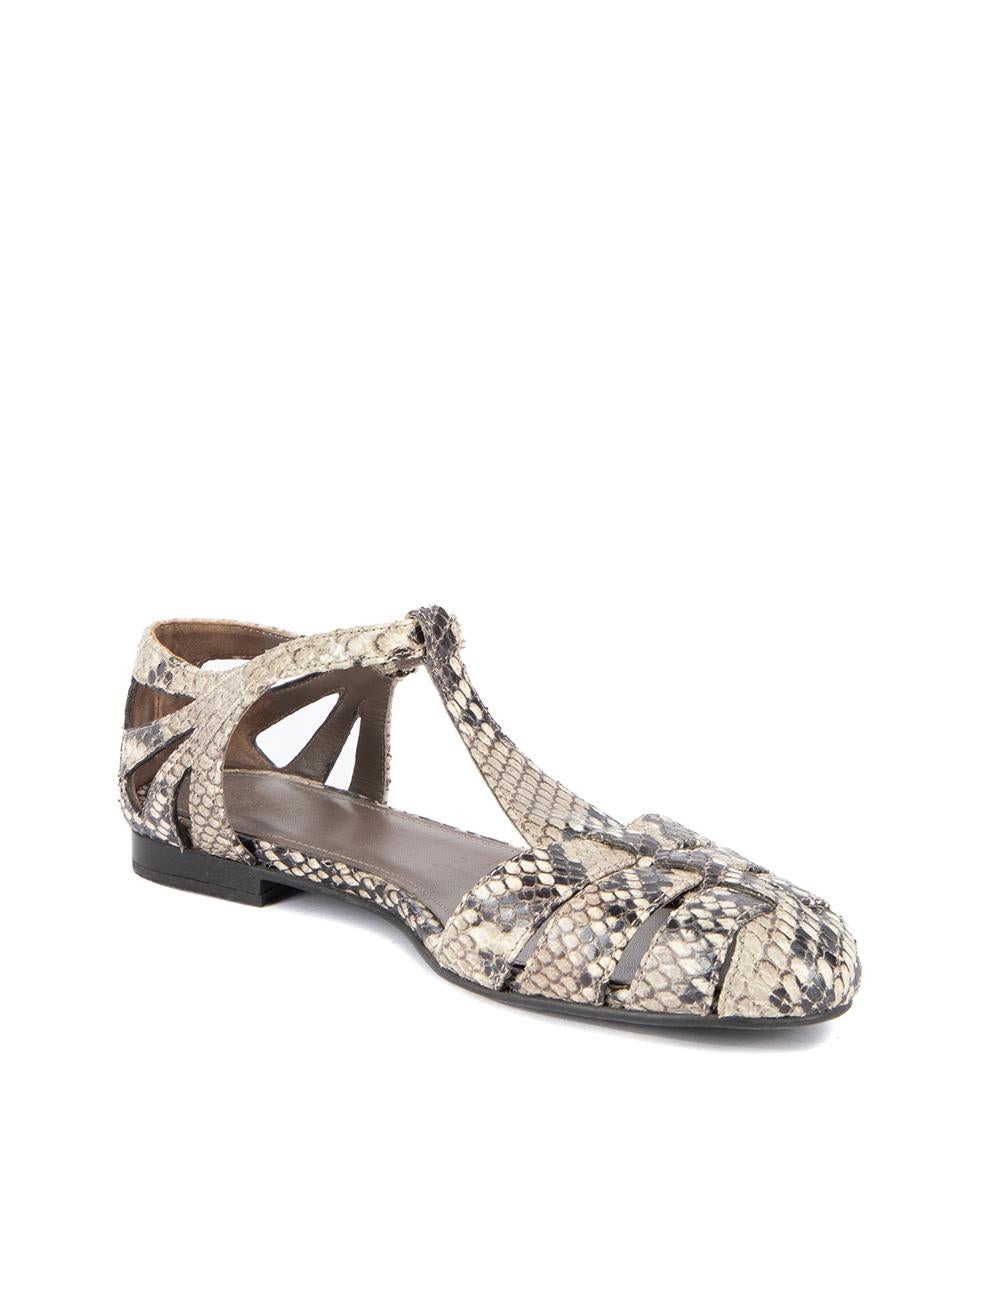 CONDITION is Very good. Minimal wear to sandals is evident. Minimal wear to the leather exterior and outsole on this used Church's designer resale item.   Details  Grey Snakeskin leather Sandals Flat heel Round toe Ankle strap closure Leather